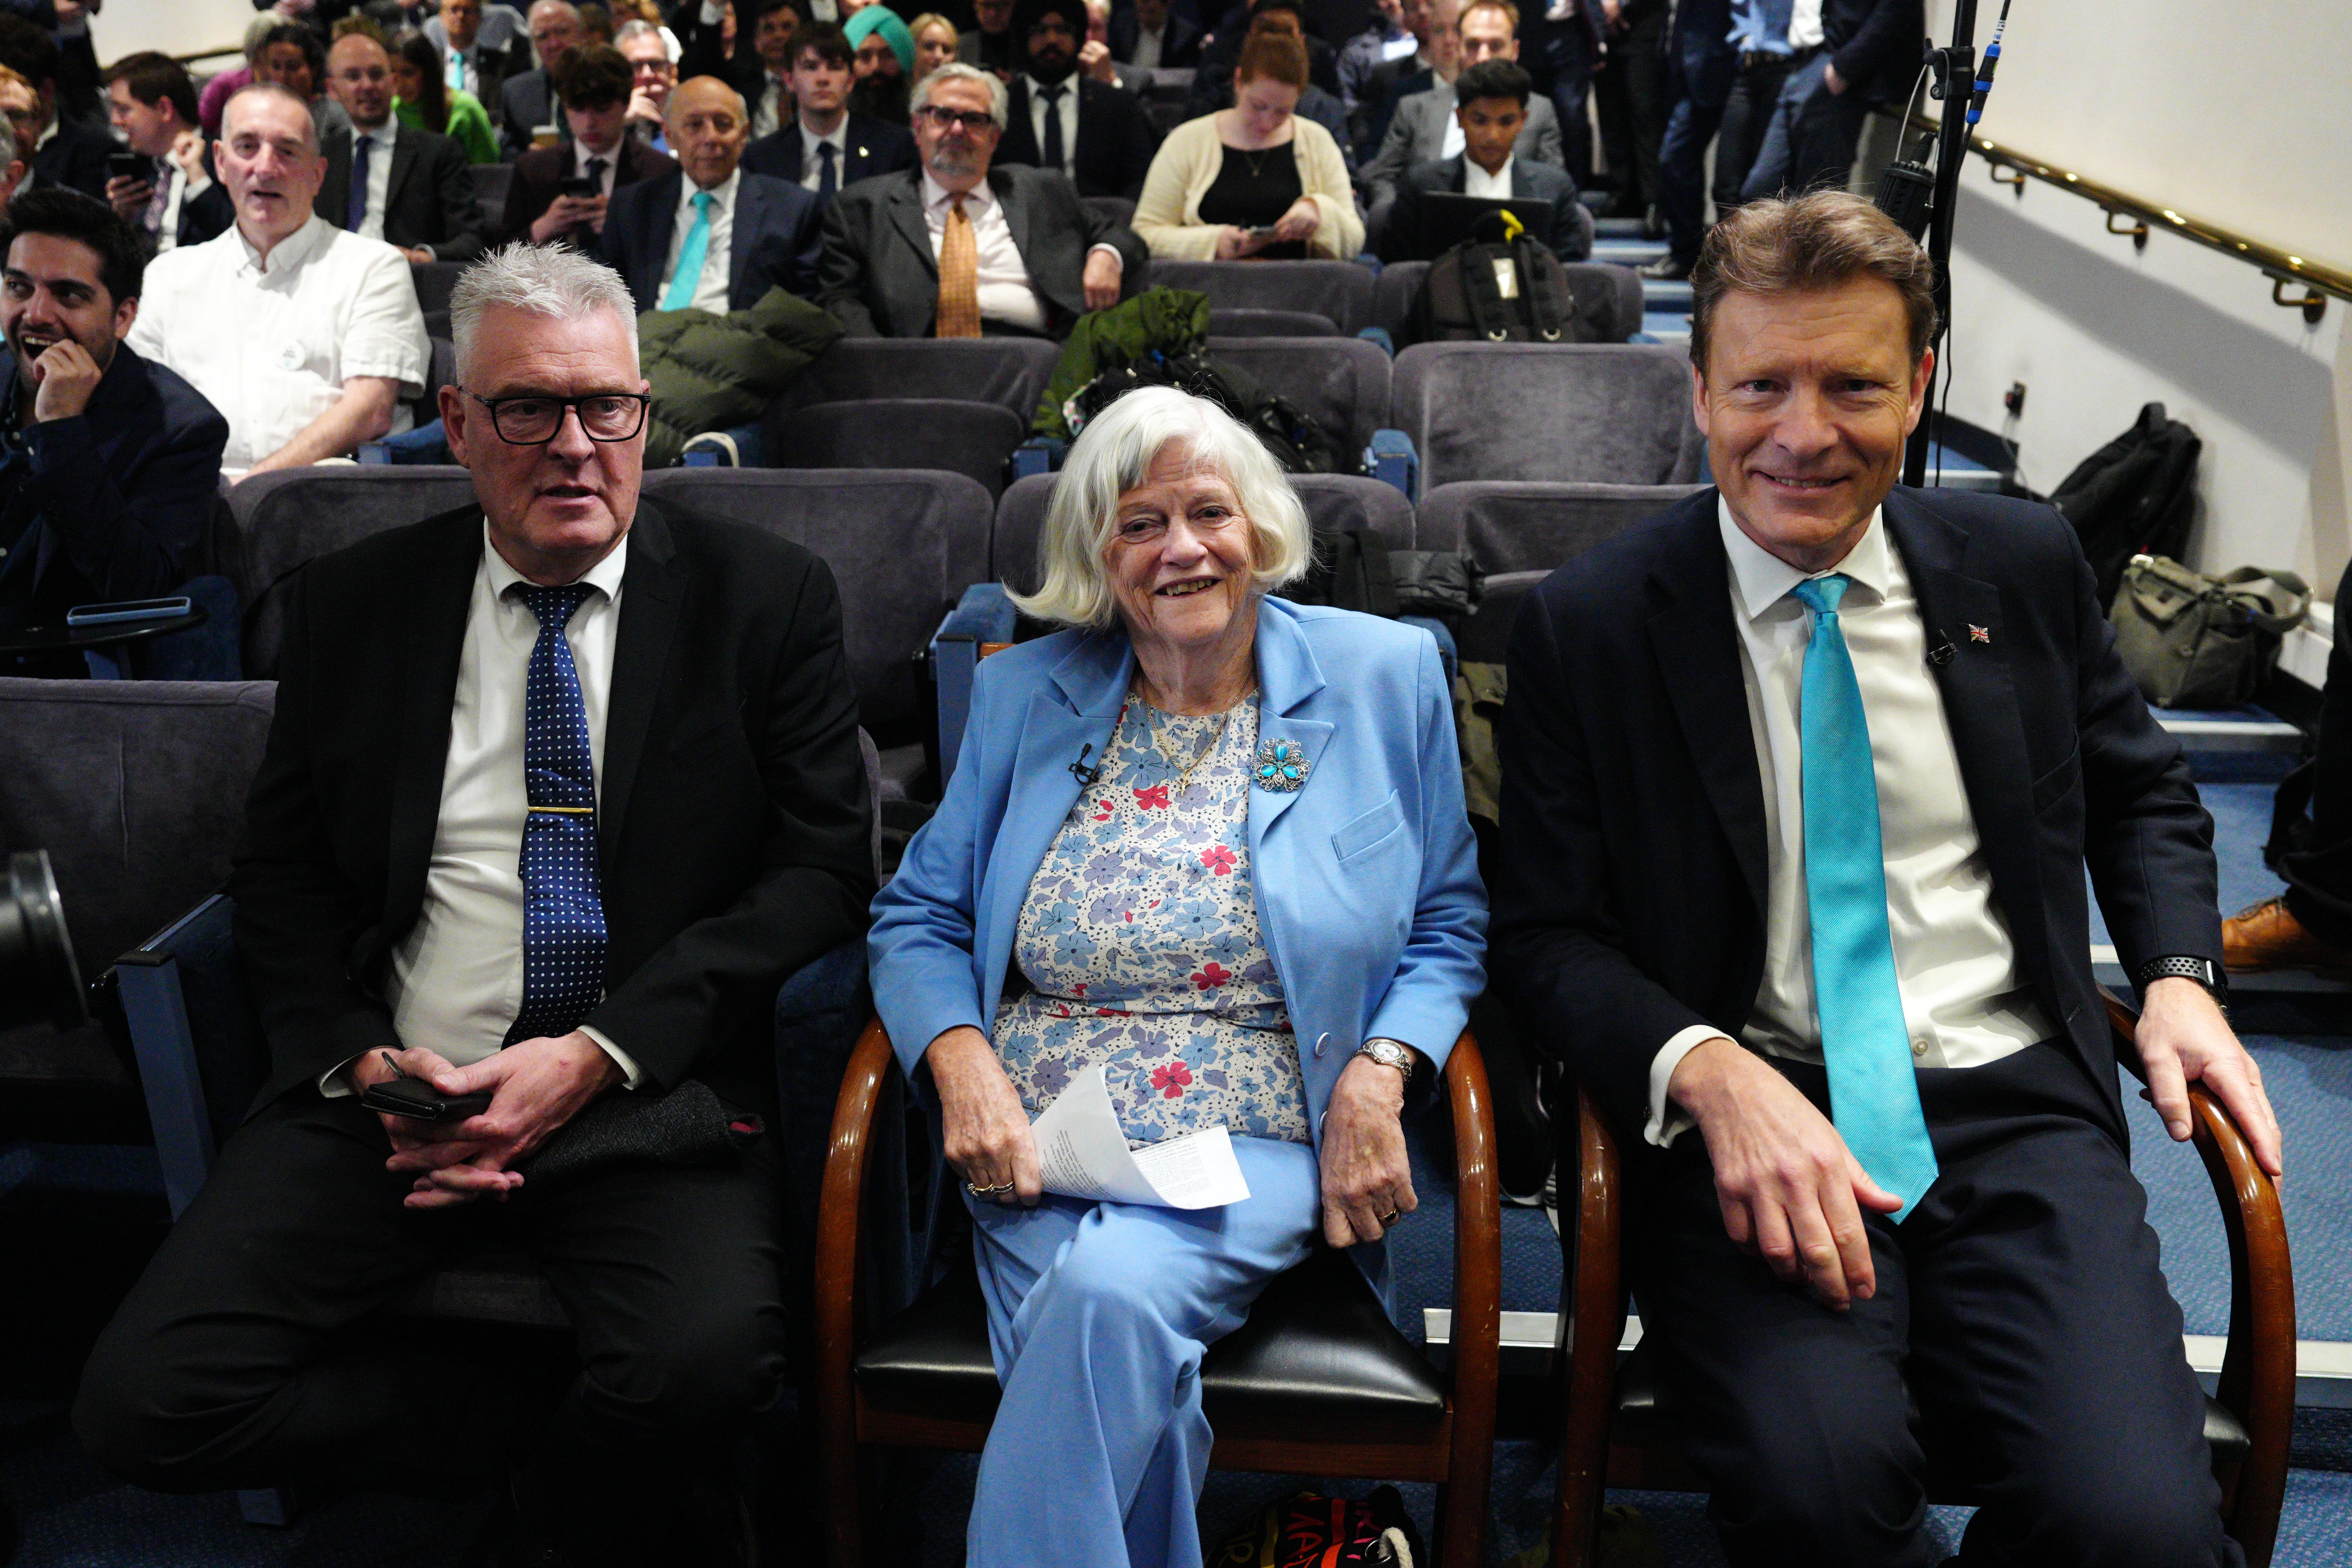 Lee Anderson, former MP Ann Widdecombe, and Reform UK leader Richard Tice at the party’s election launch on Thursday